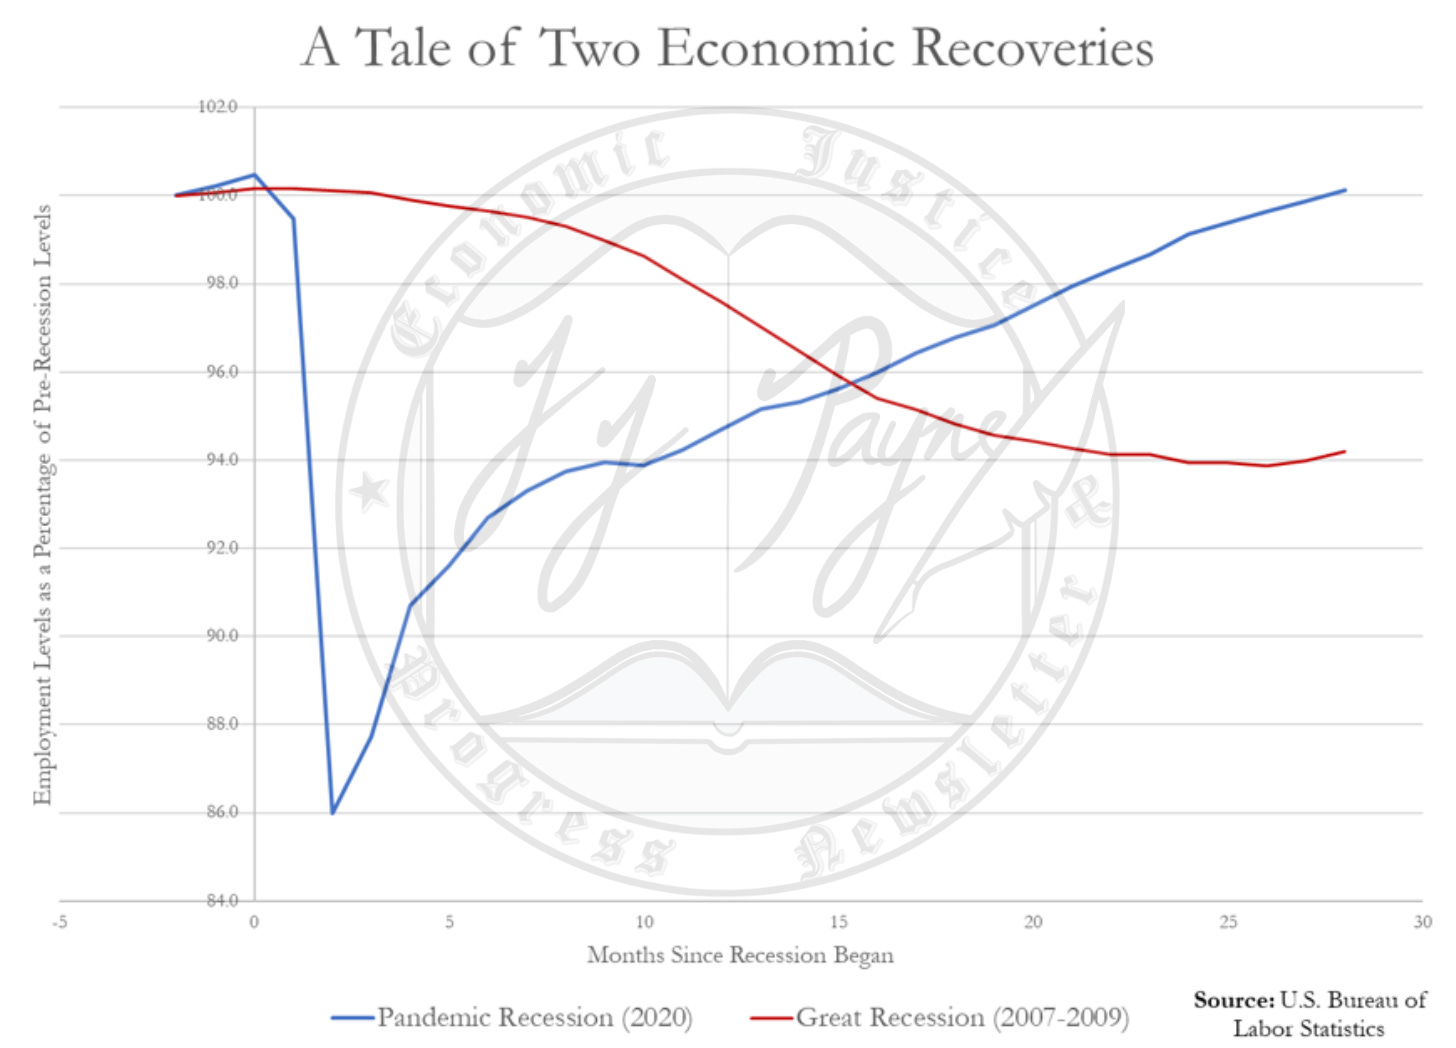 Post-recession employment recoveries: 2020 vs. Great Recession